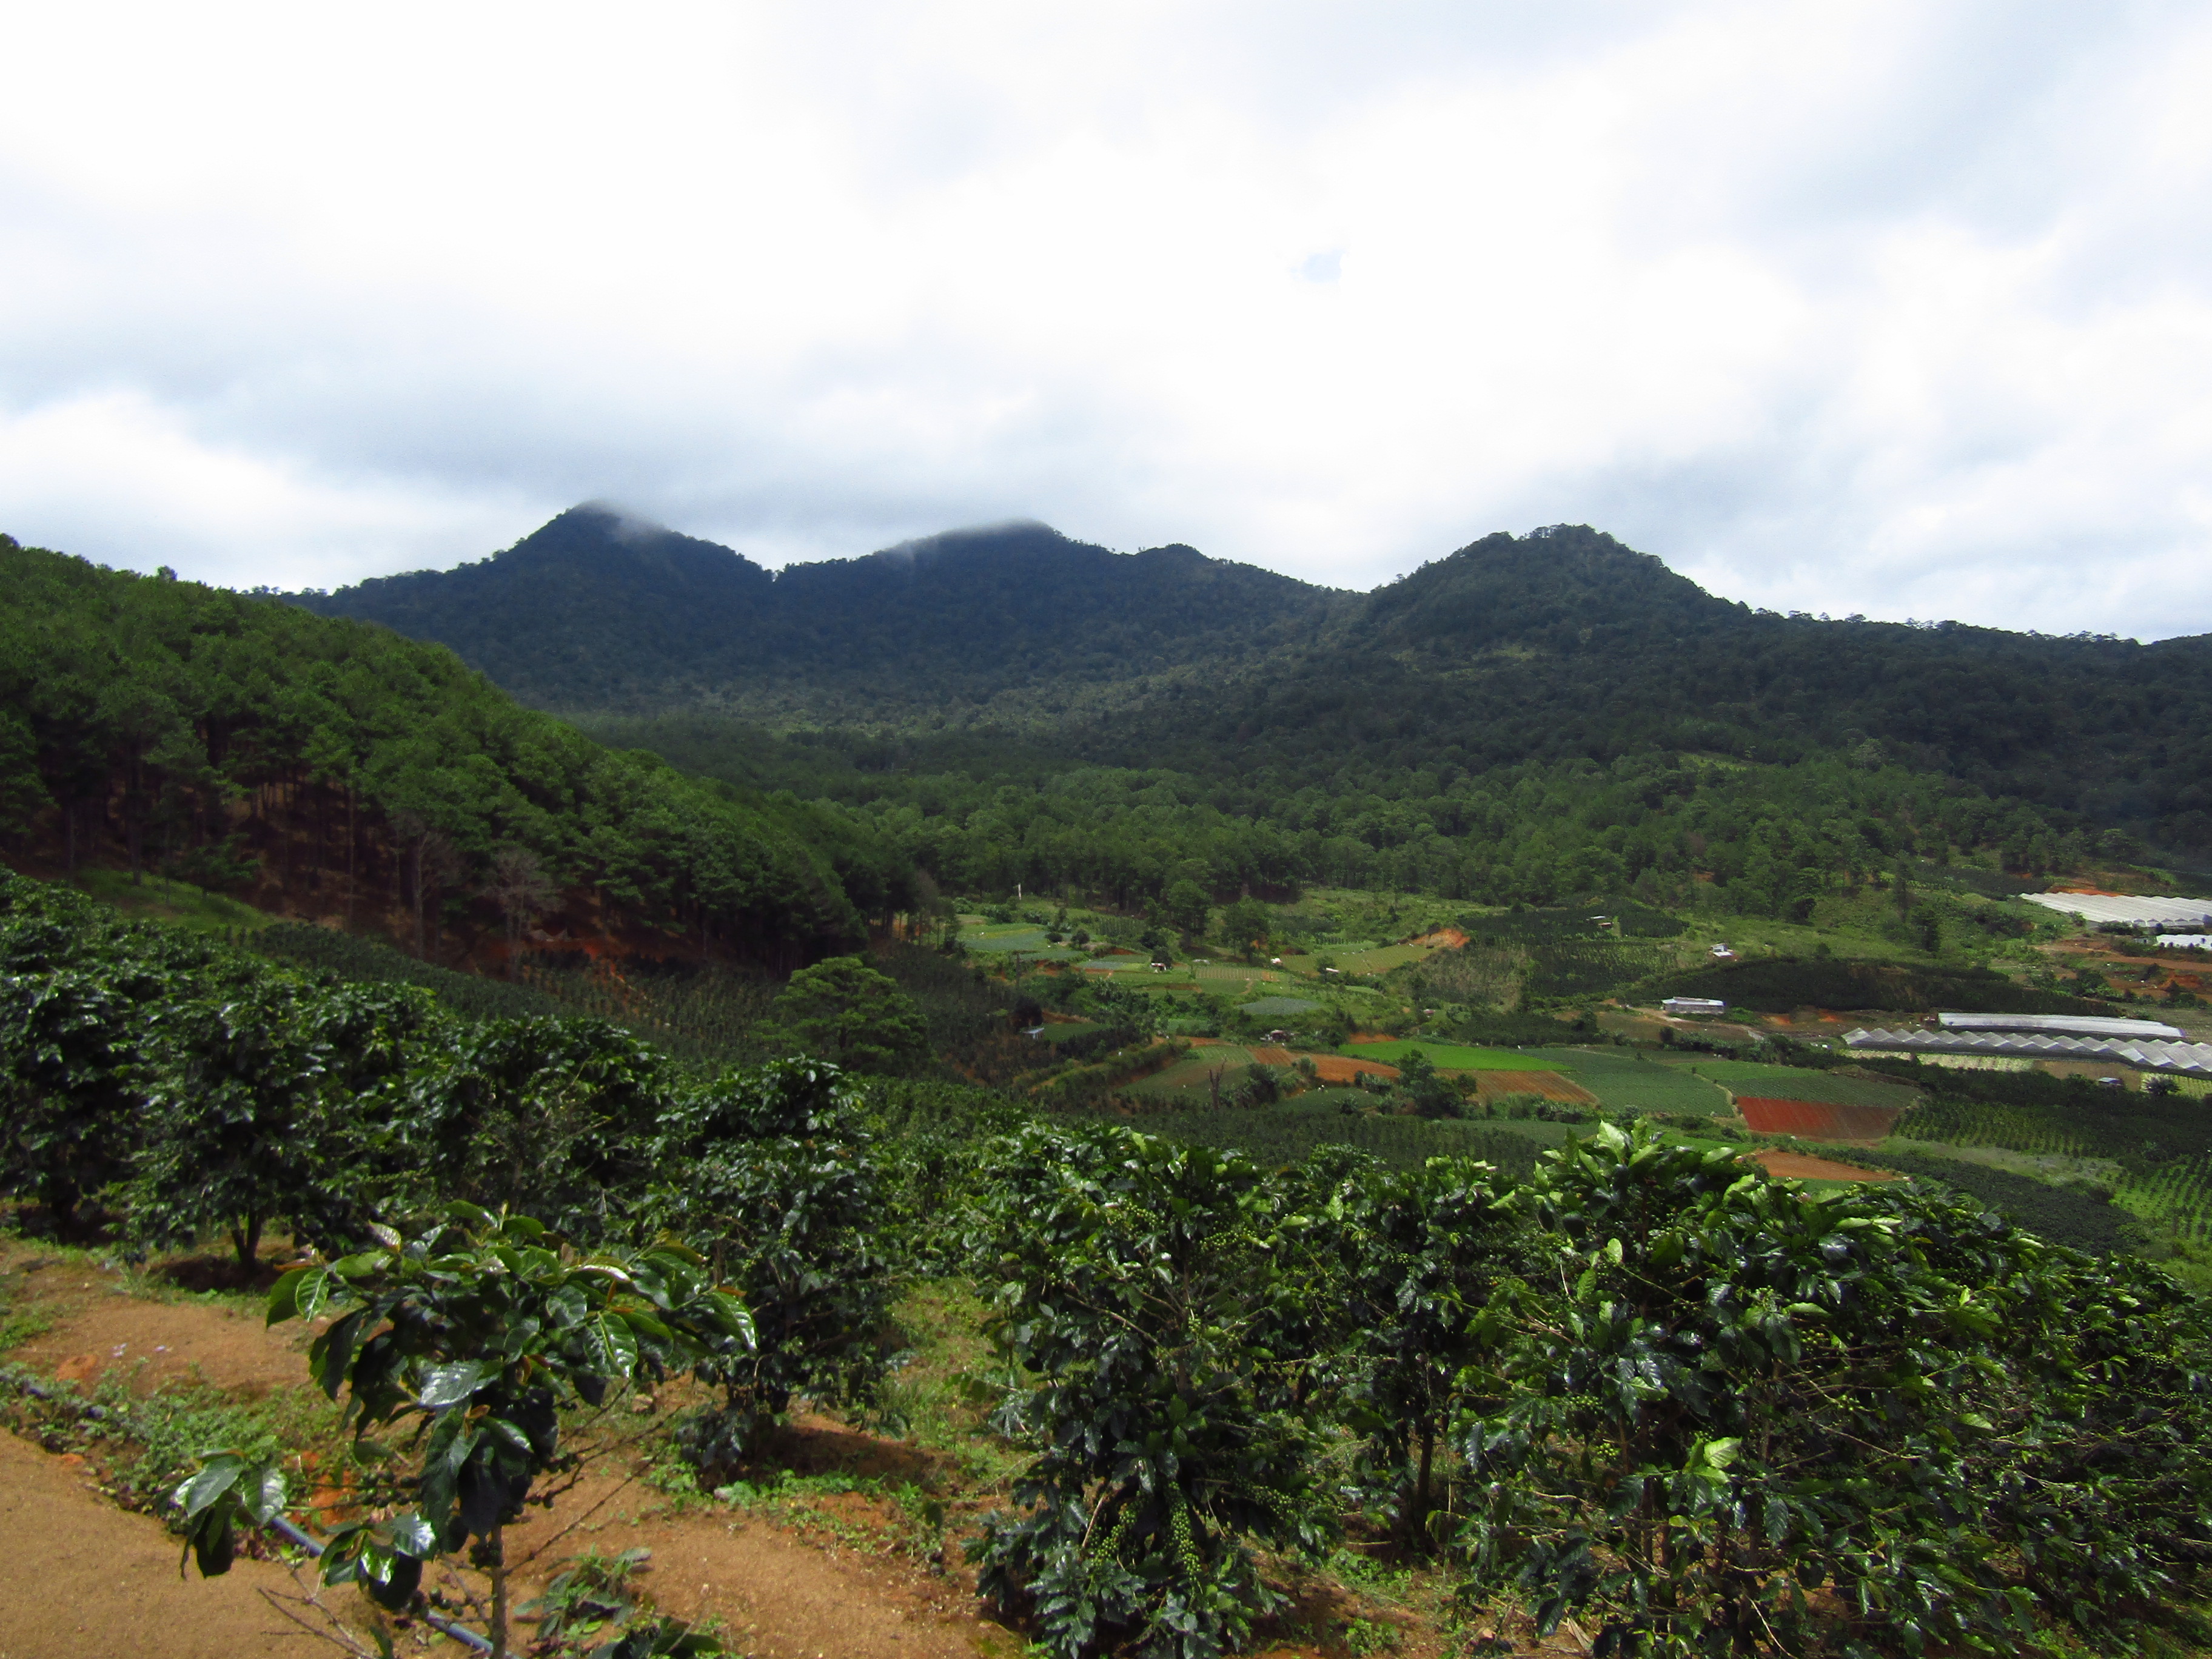 Lang Biang Mountain and coffee plantations in the foreground